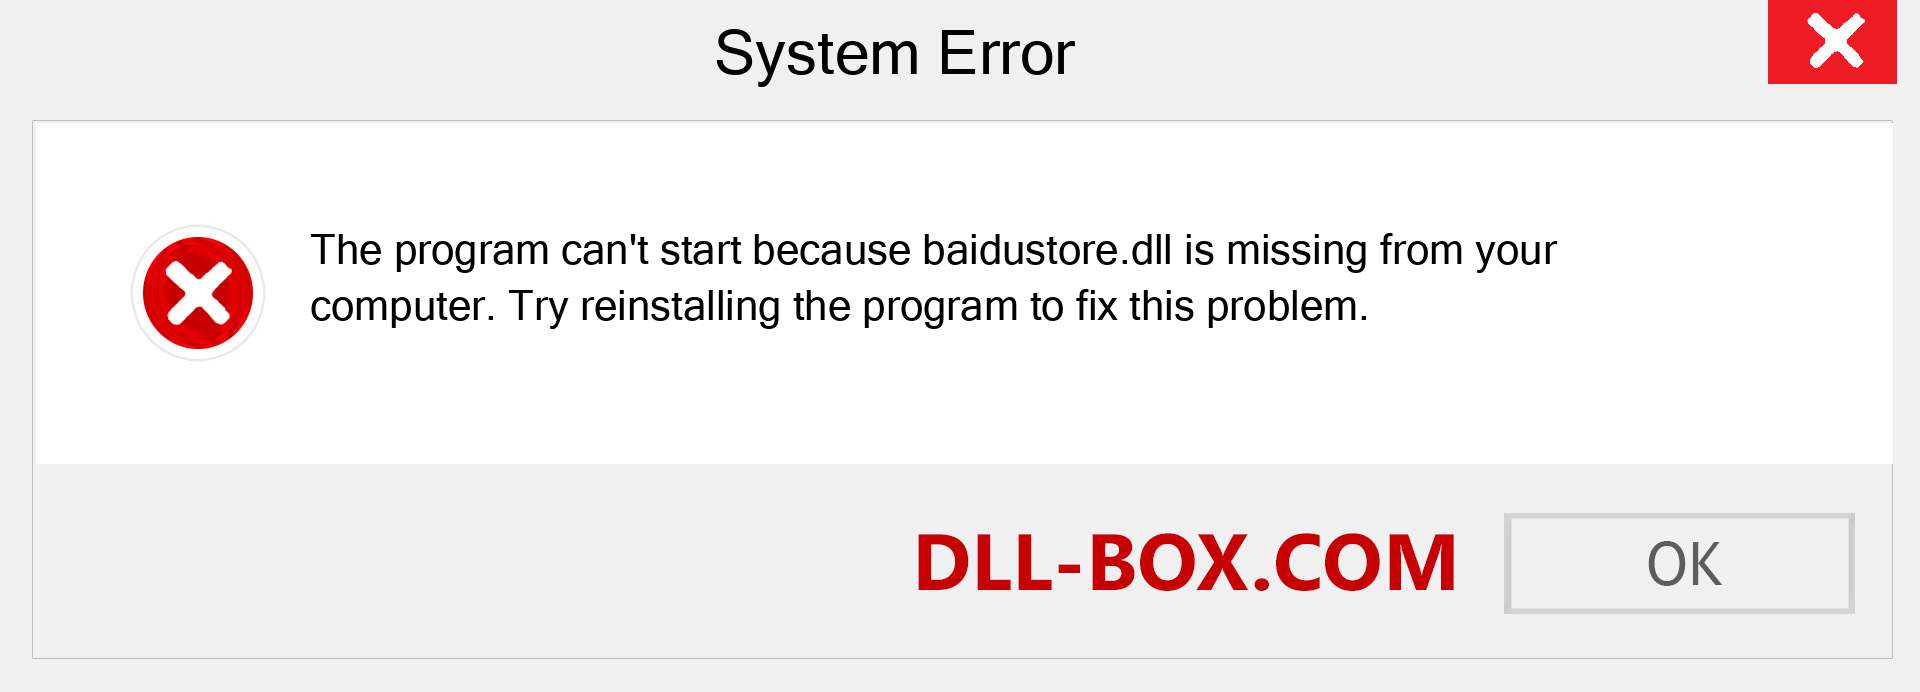  baidustore.dll file is missing?. Download for Windows 7, 8, 10 - Fix  baidustore dll Missing Error on Windows, photos, images